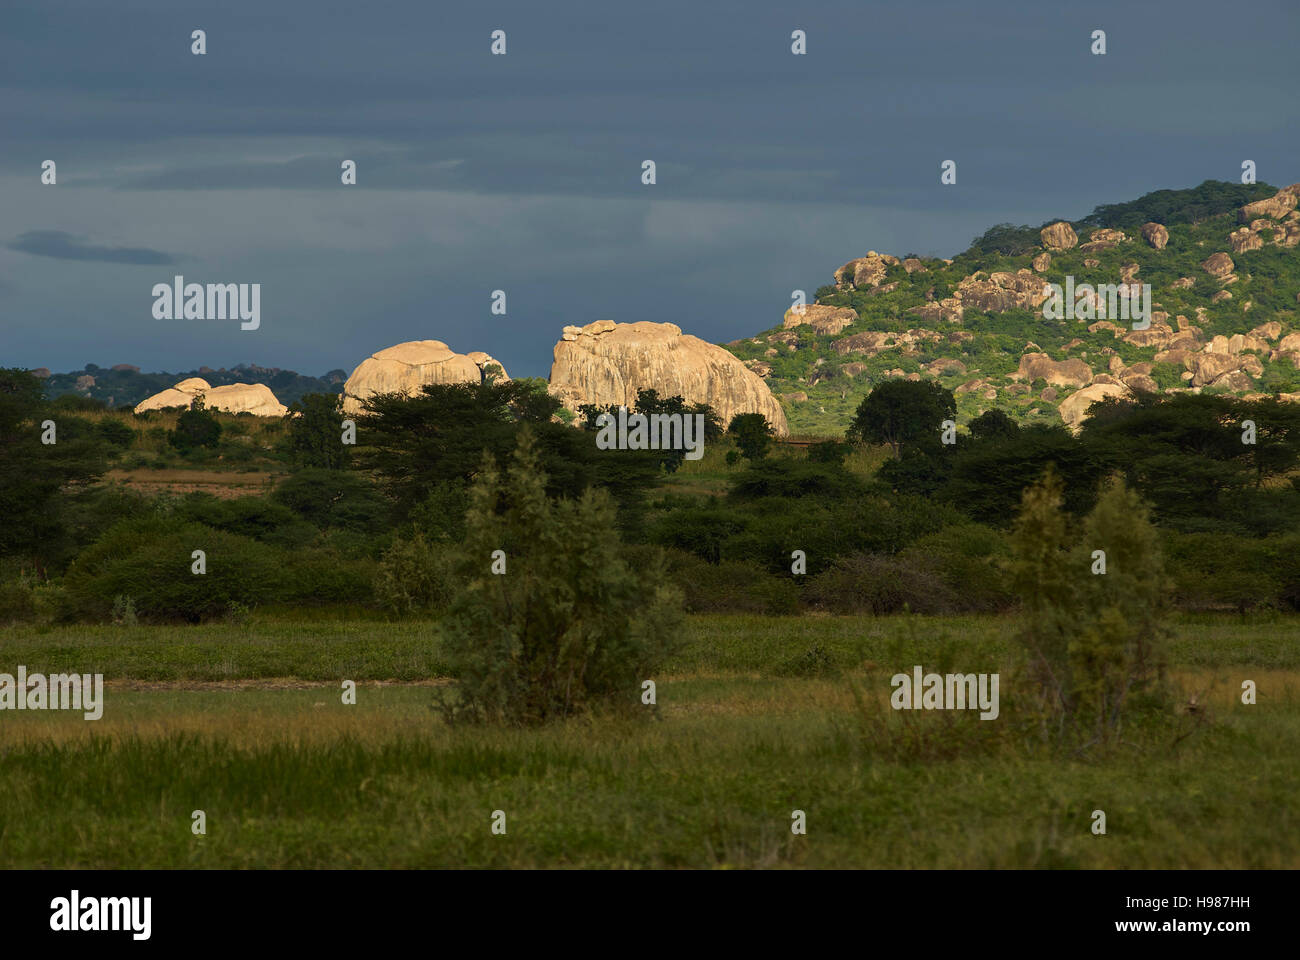 Bizarre rocks glowing in late afternoon sunlight, Central Tanzania Stock Photo